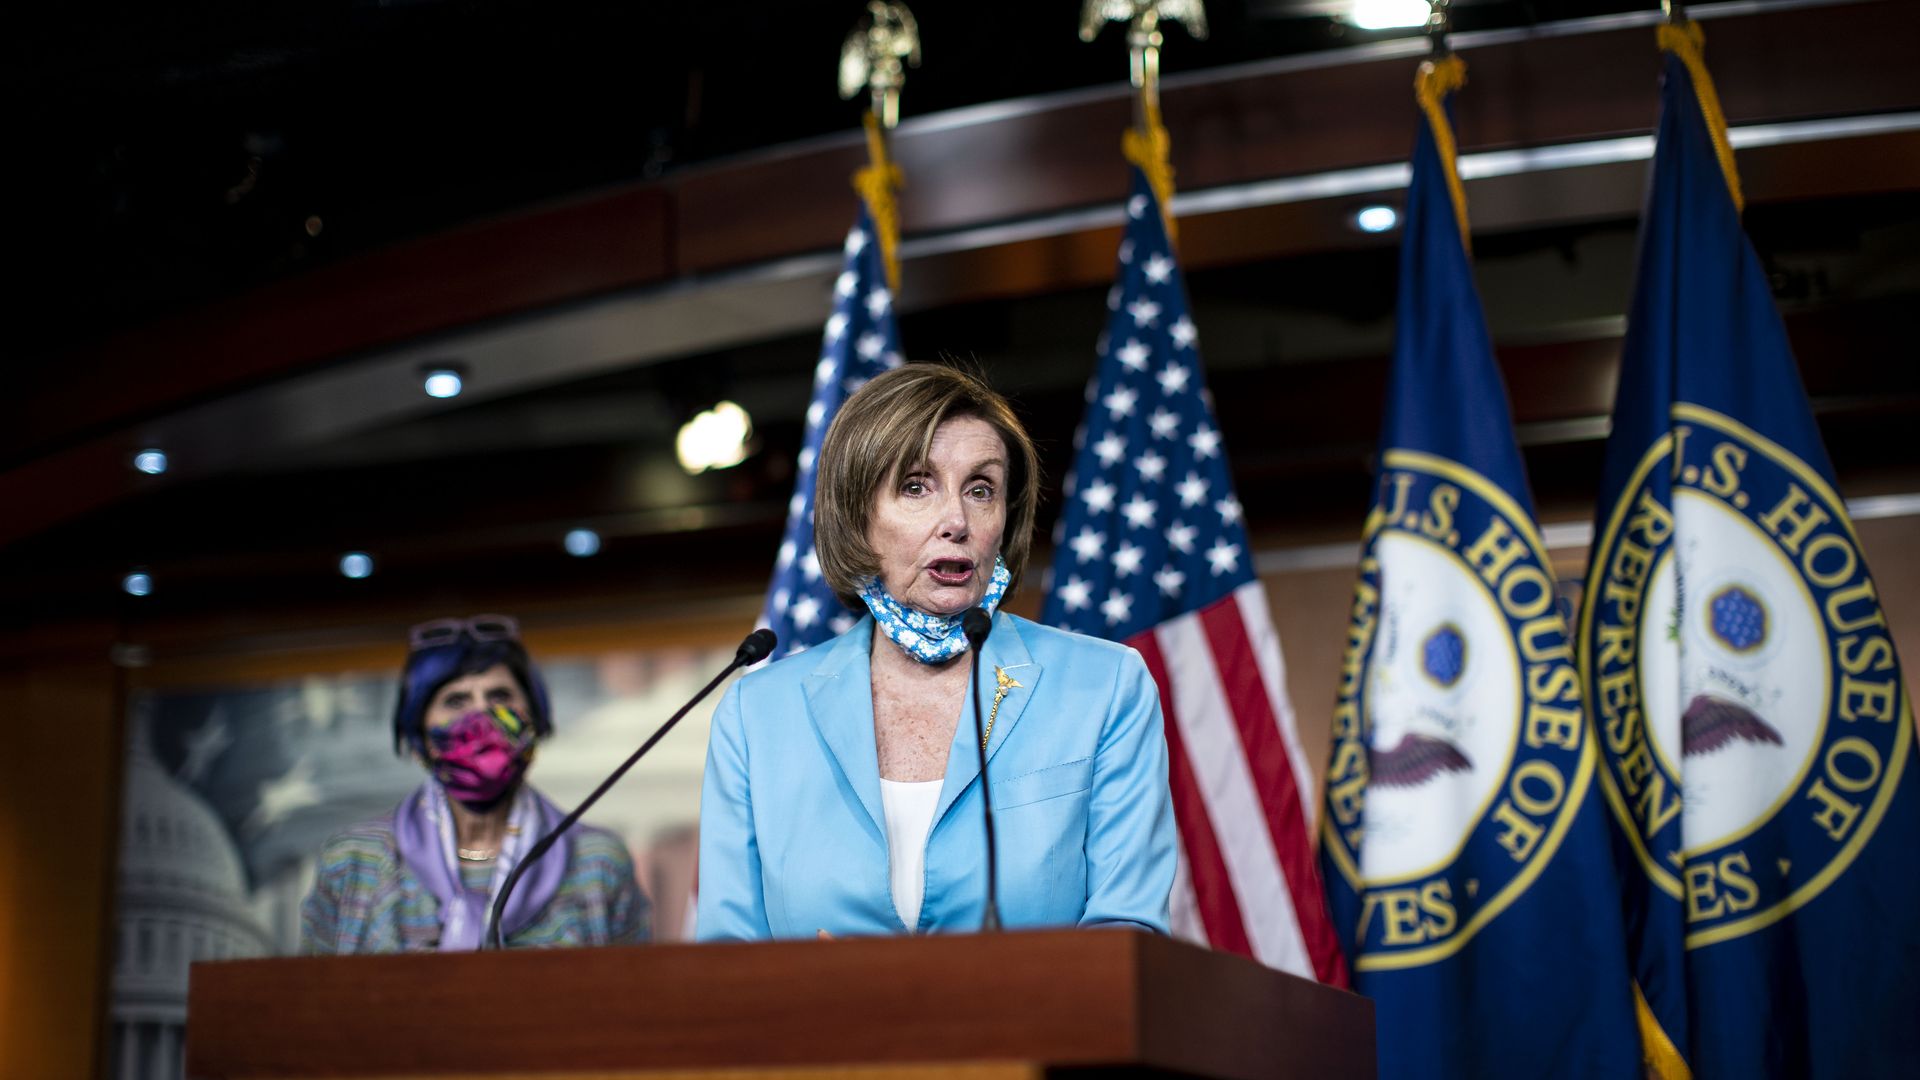 U.S. House Speaker Nancy Pelosi, a Democrat from California, speaks during a news conference at the U.S. Capitol.